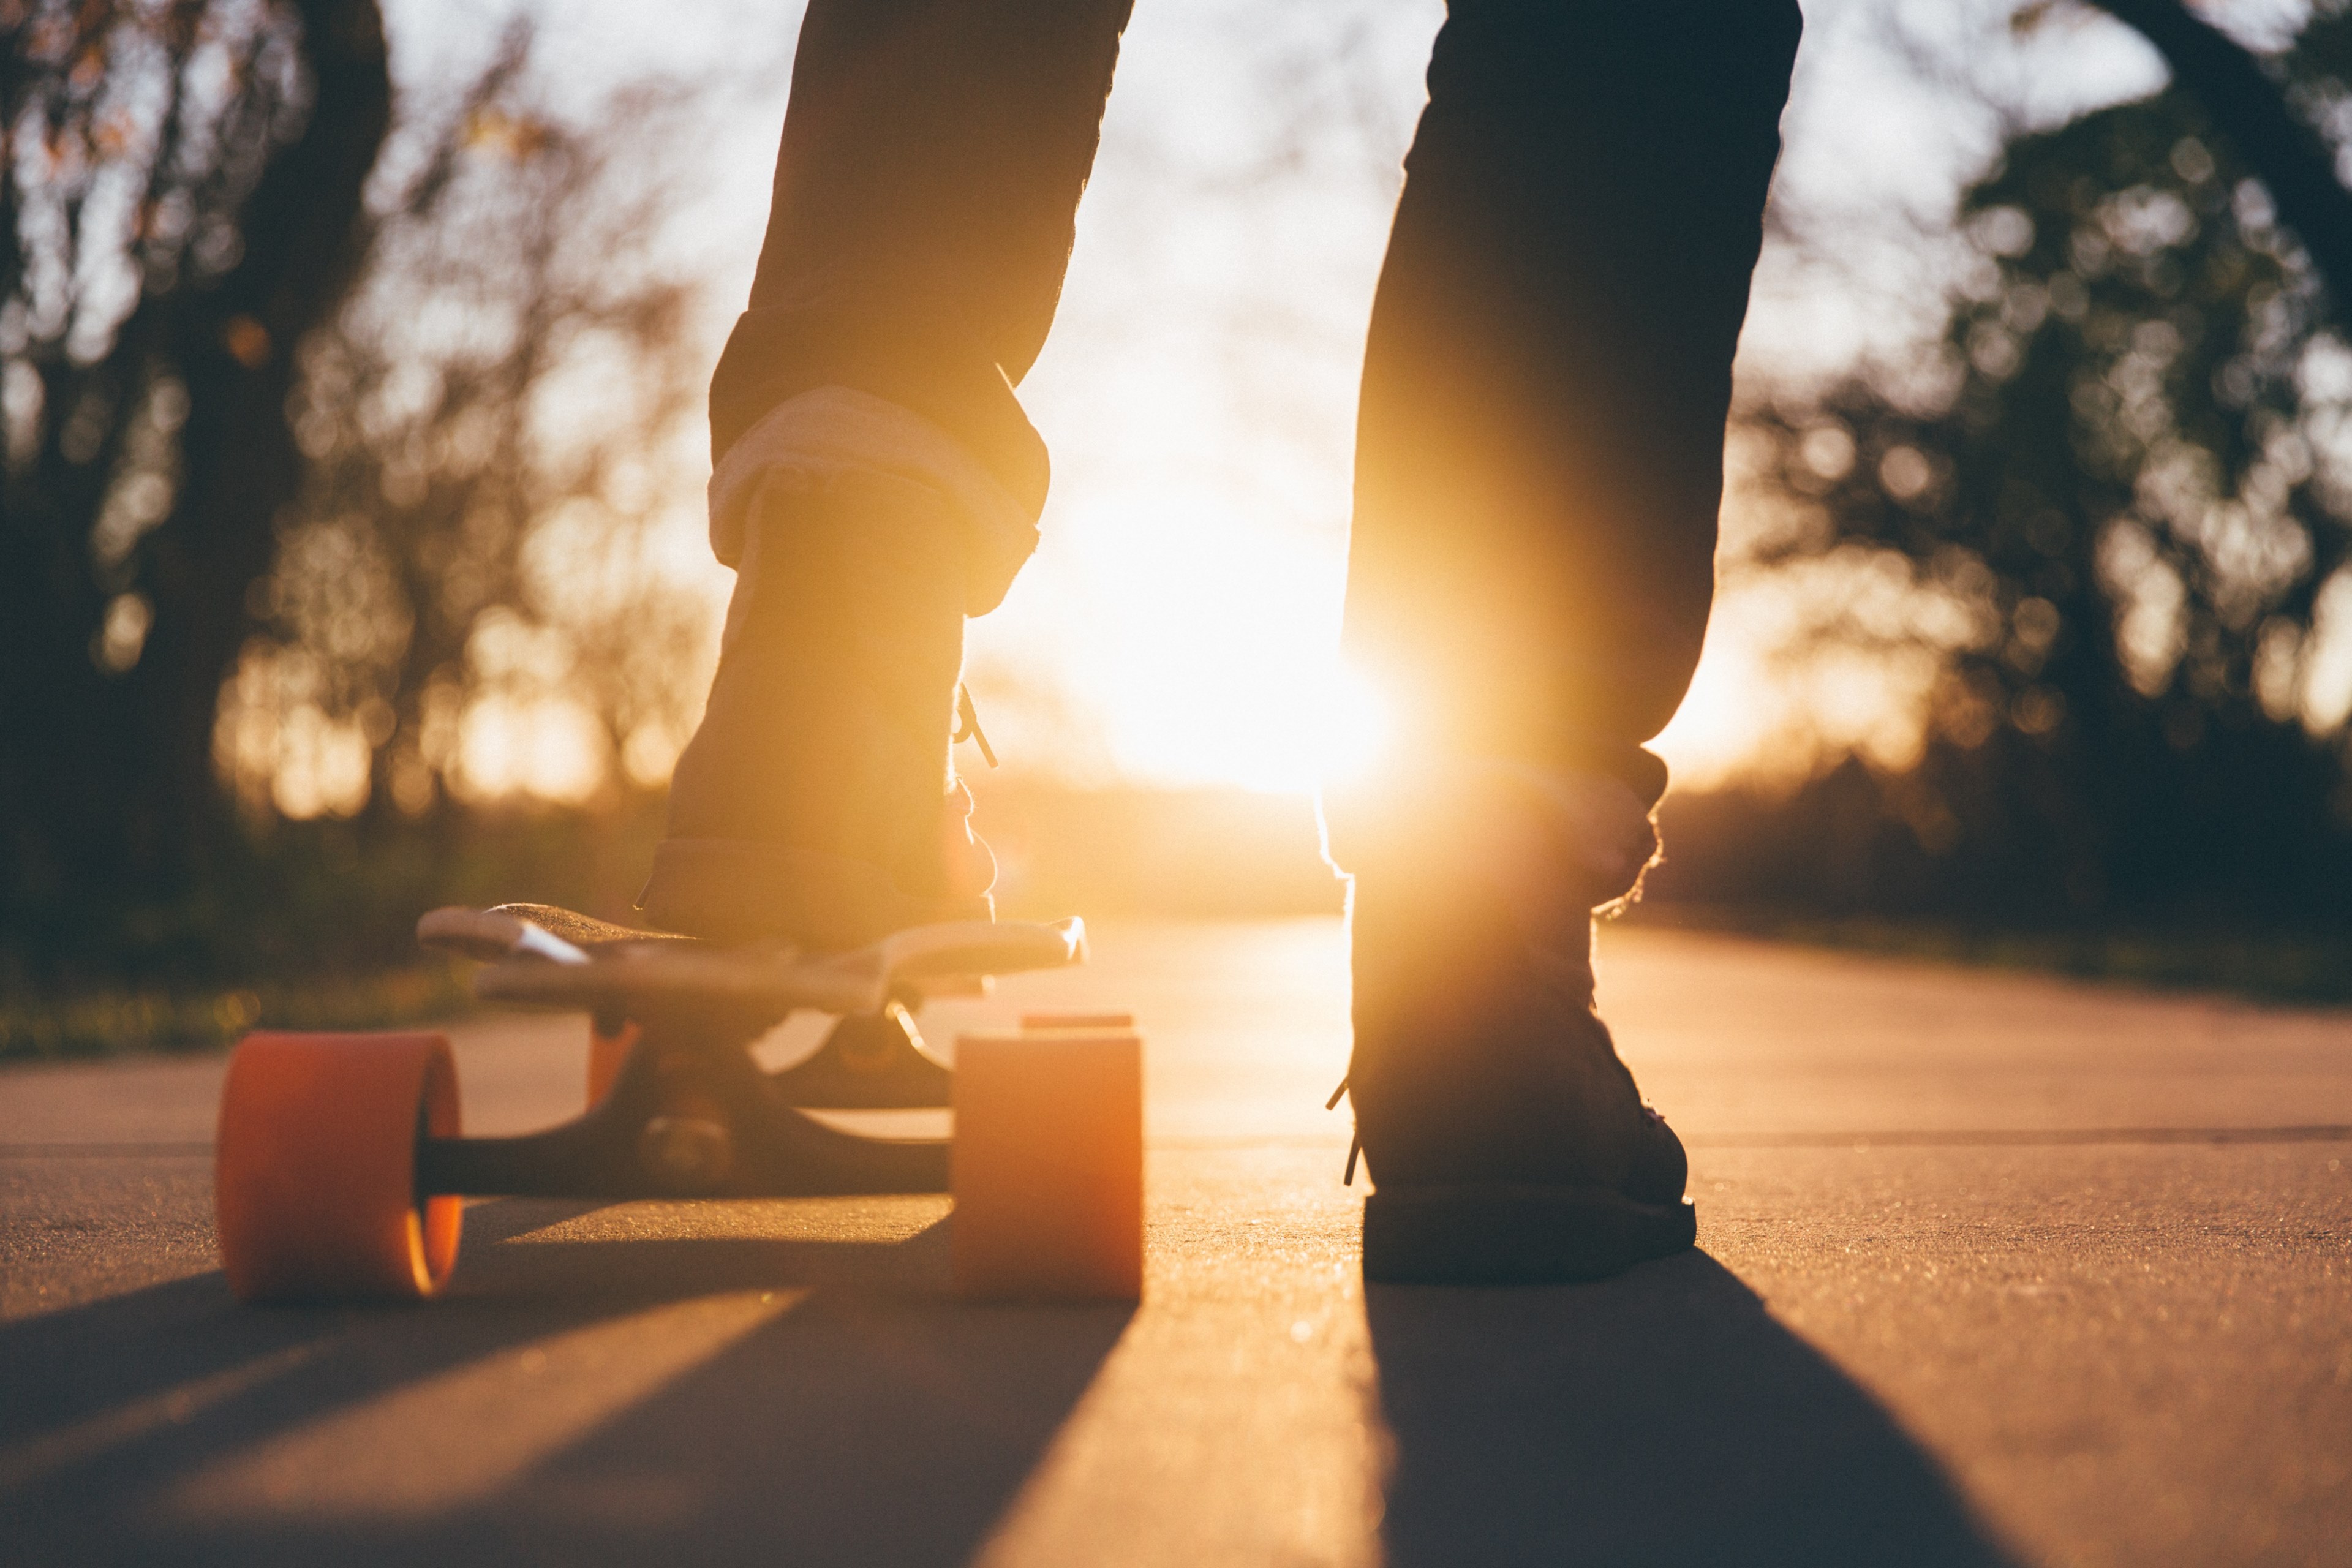 Wallpaper / the silhouette of a person riding a skateboard with orange wheels at sunset at university of northern iowa, northern iowa skateboarder 4k wallpaper